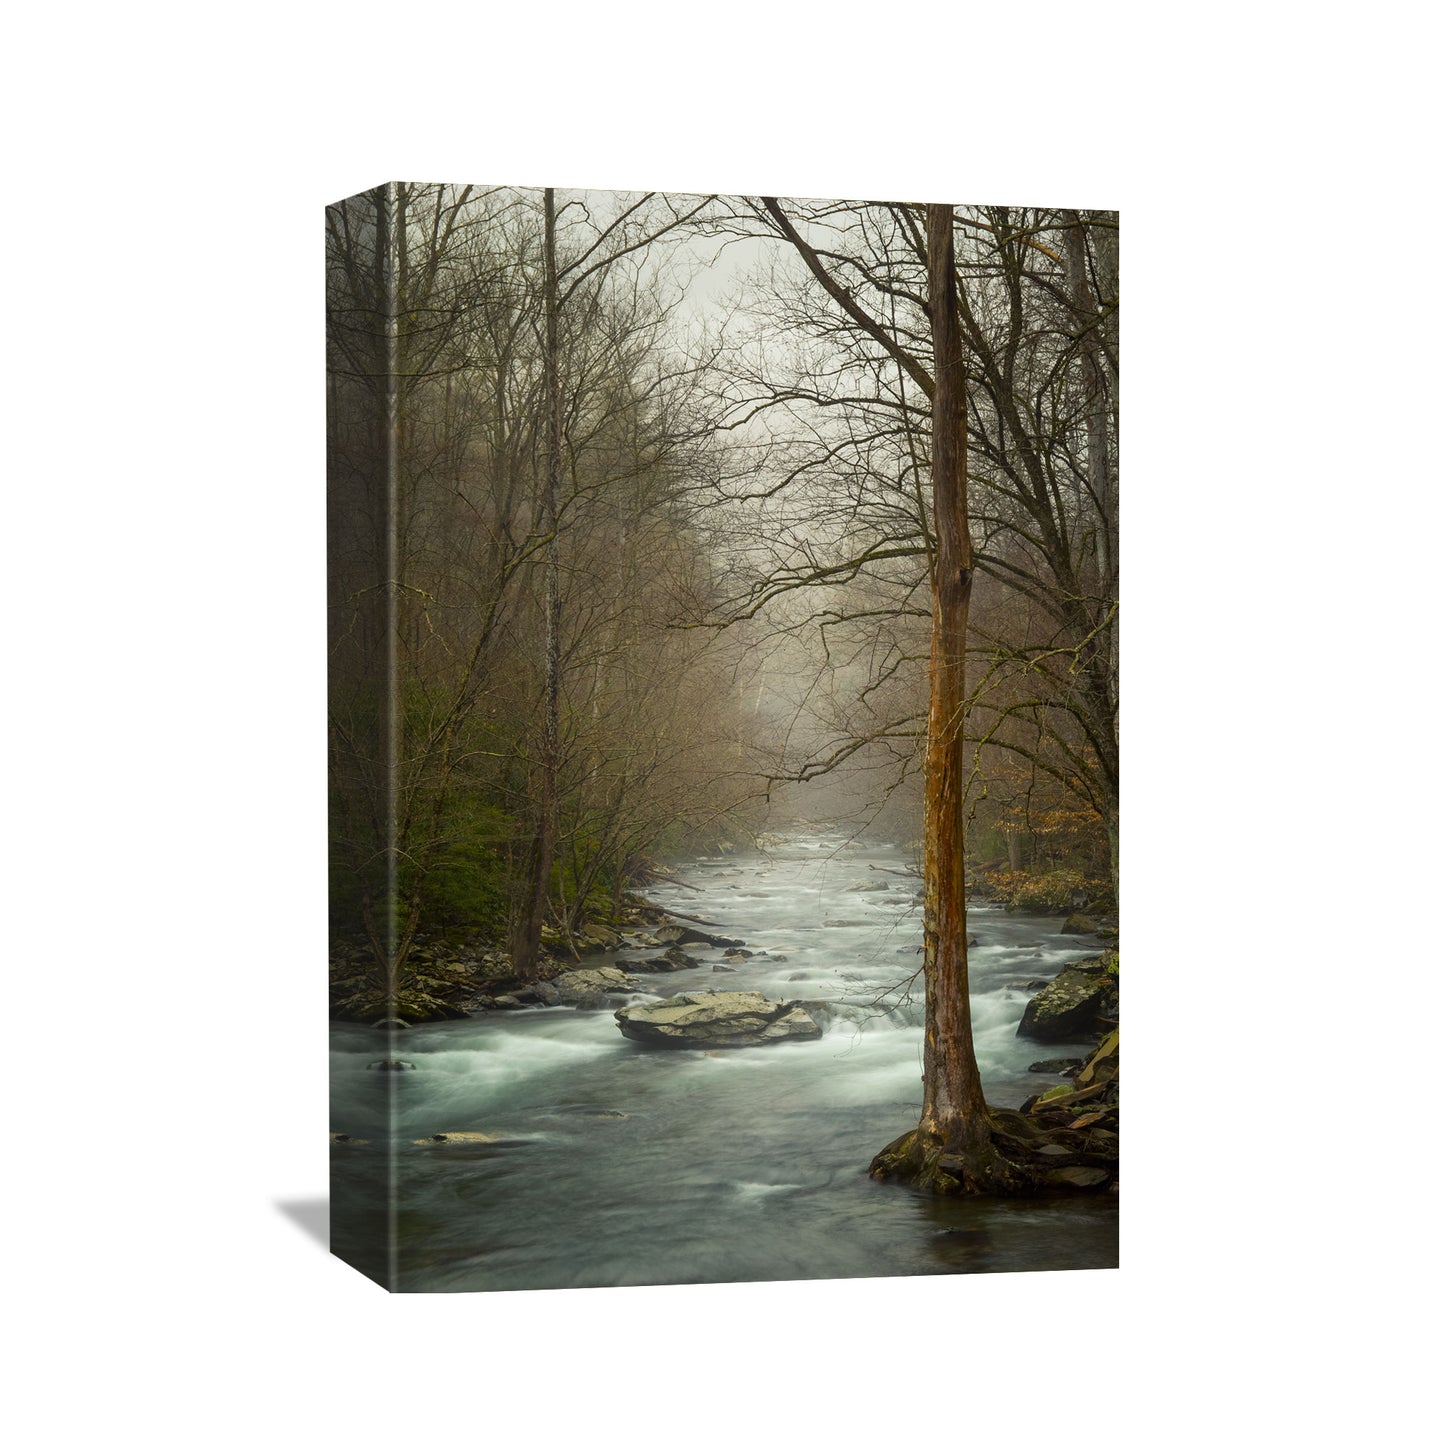 Decorate your walls with the calming scenery of the Little River flowing through the Great Smoky Mountains, beautifully reproduced on canvas for art lovers and nature enthusiasts alike.